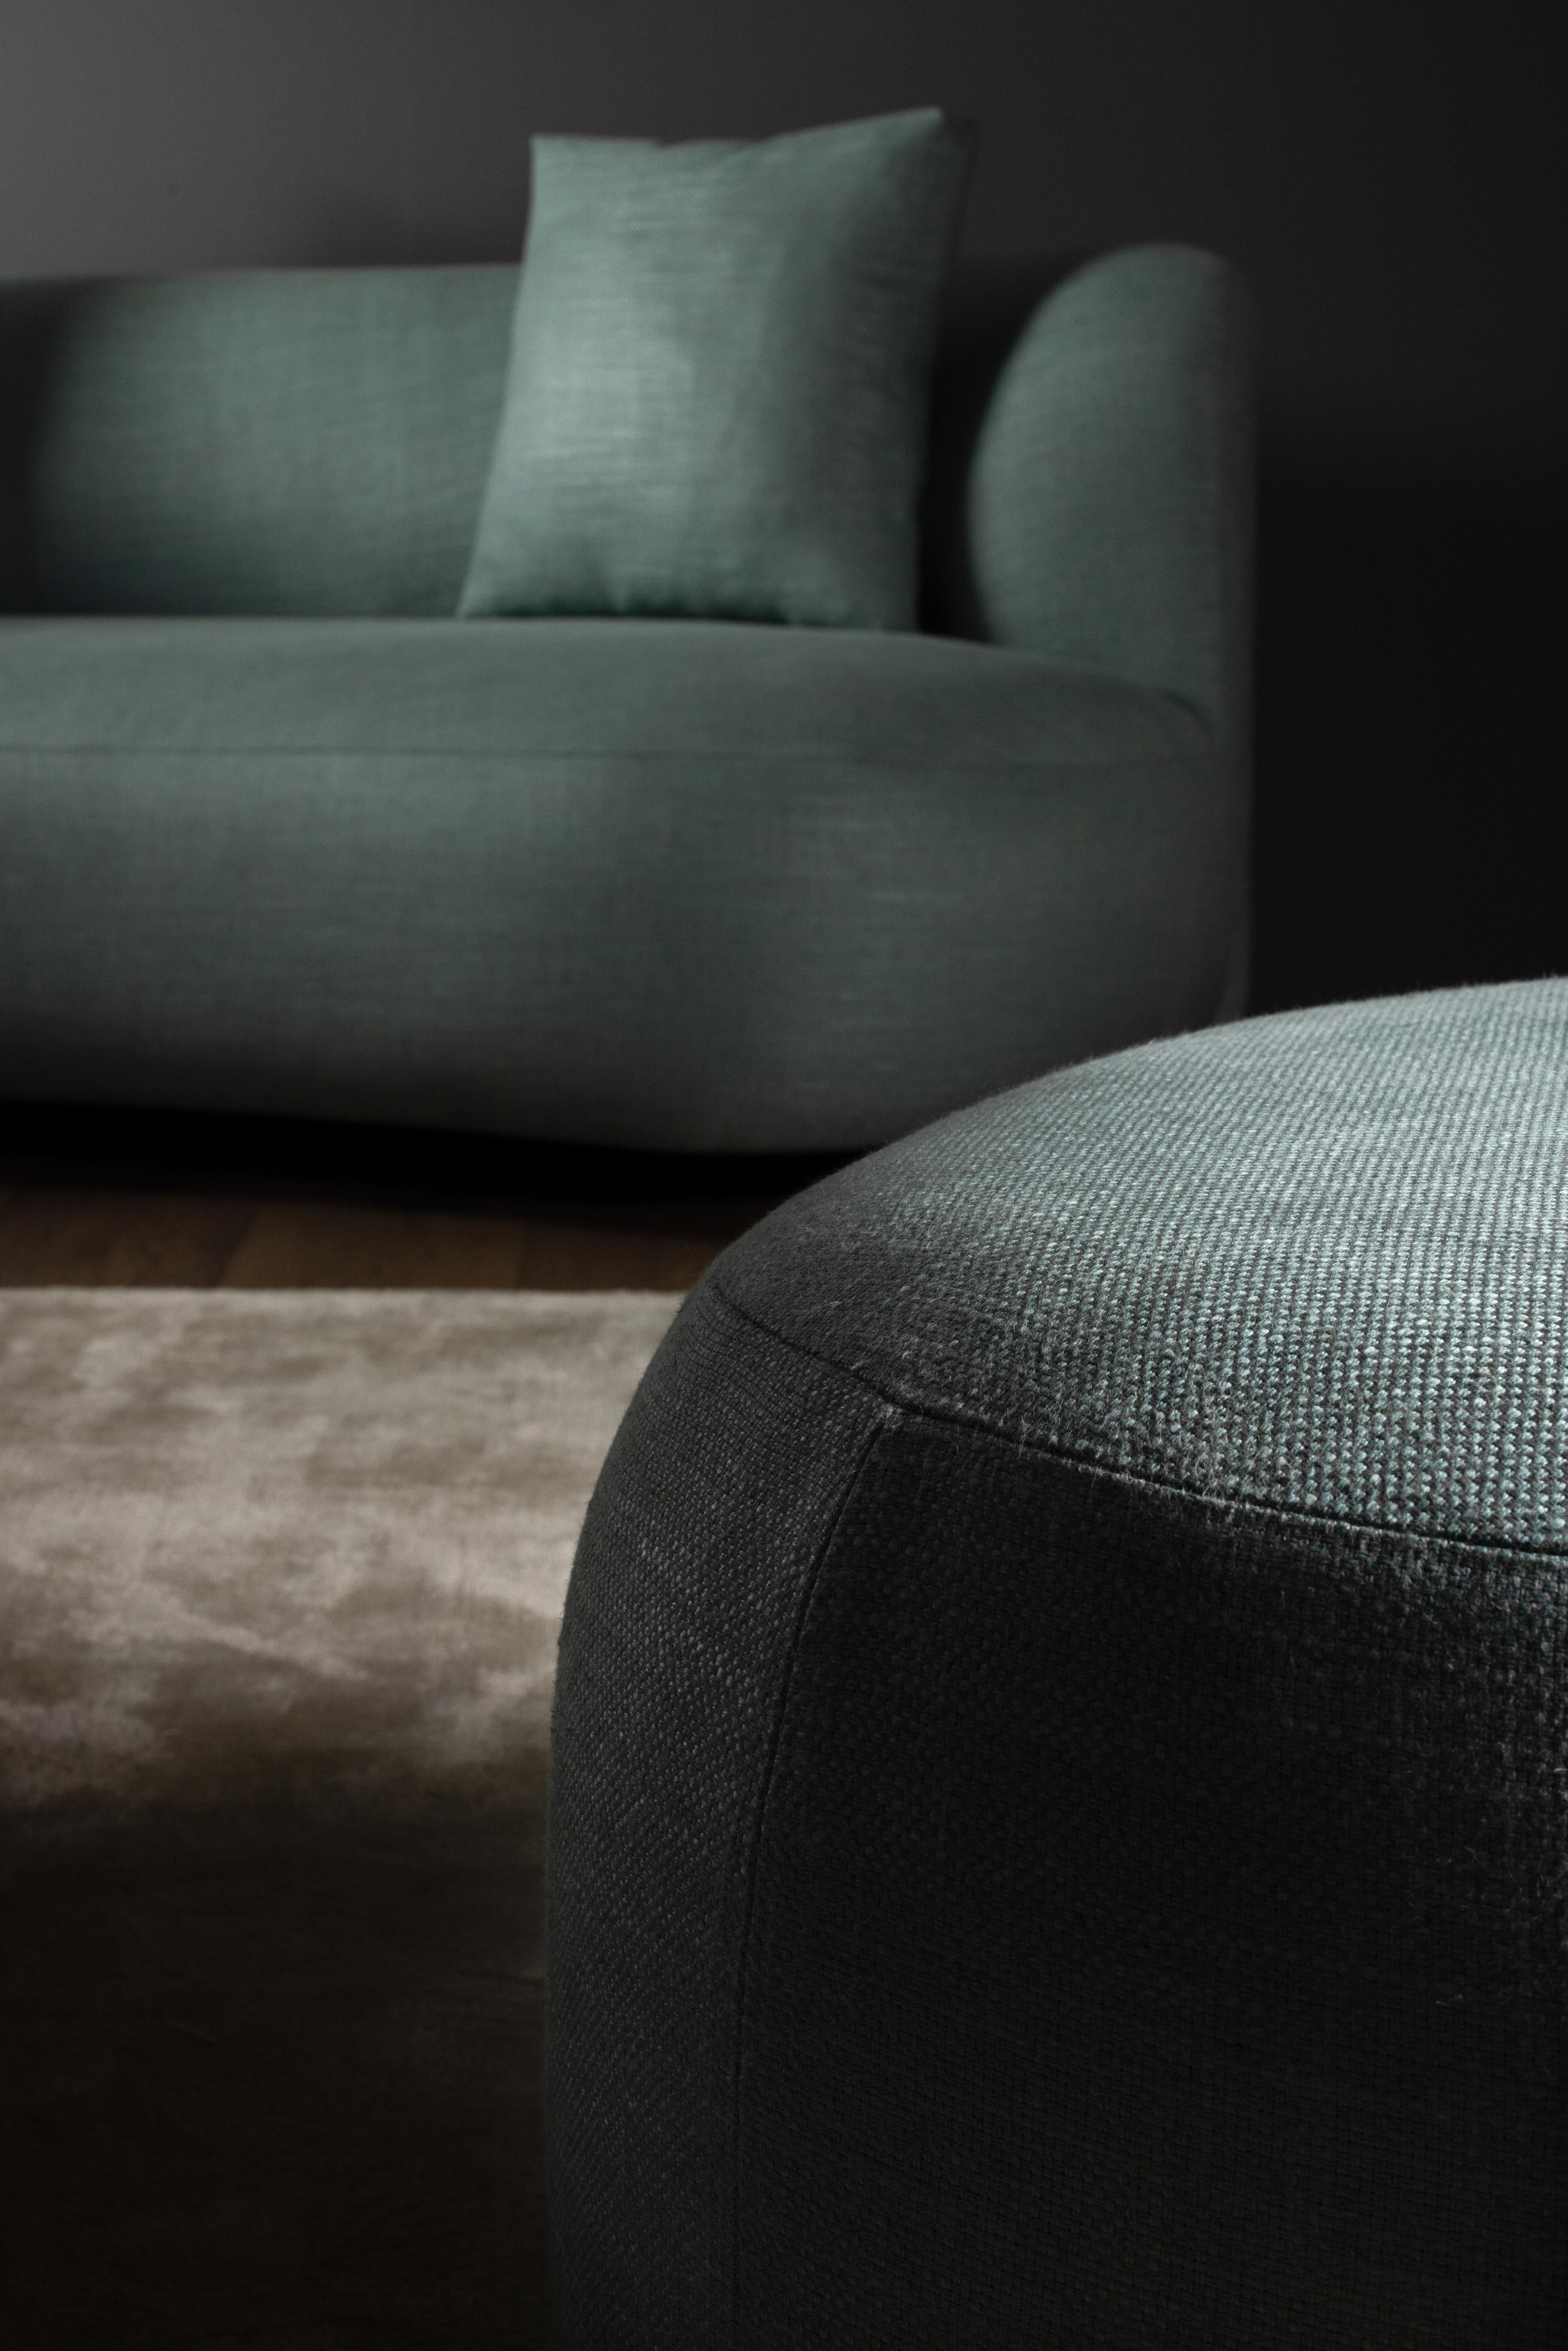 Twins Pouf Ottoman, Contemporary Collection, Handcrafted in Portugal - Europe by GF Contemporary.

The Twins ottoman elevates the space into realms of comfort while offering an irresistible haven for lounging, where timeless craftsmanship meets